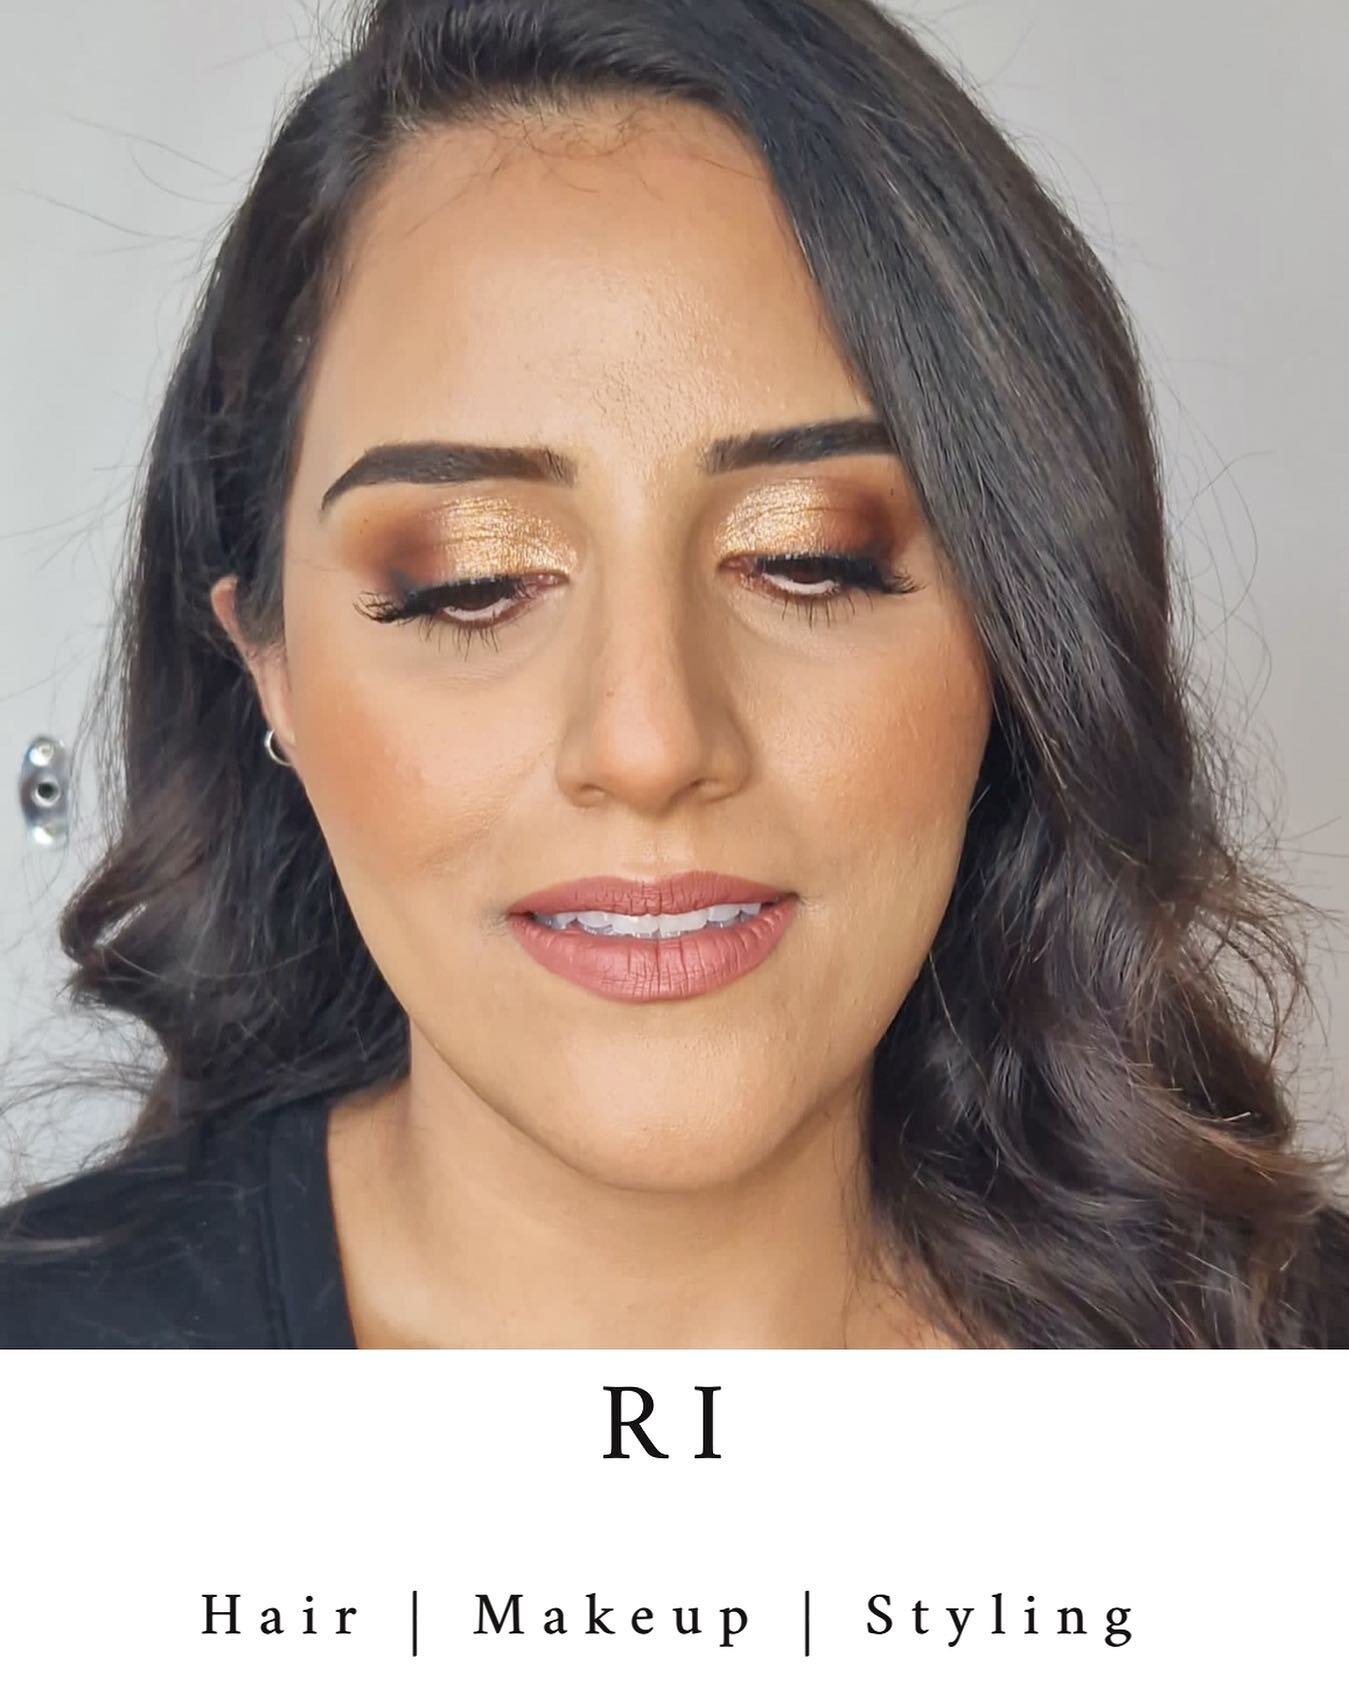 Stylist: RI
📍Location: W. LONDON - available to travel ----------------------------------------------------------------------------------
To BOOK 👉🏽 Email us at promakeuplondonstylists@gmail.com ----------------------------------------------------